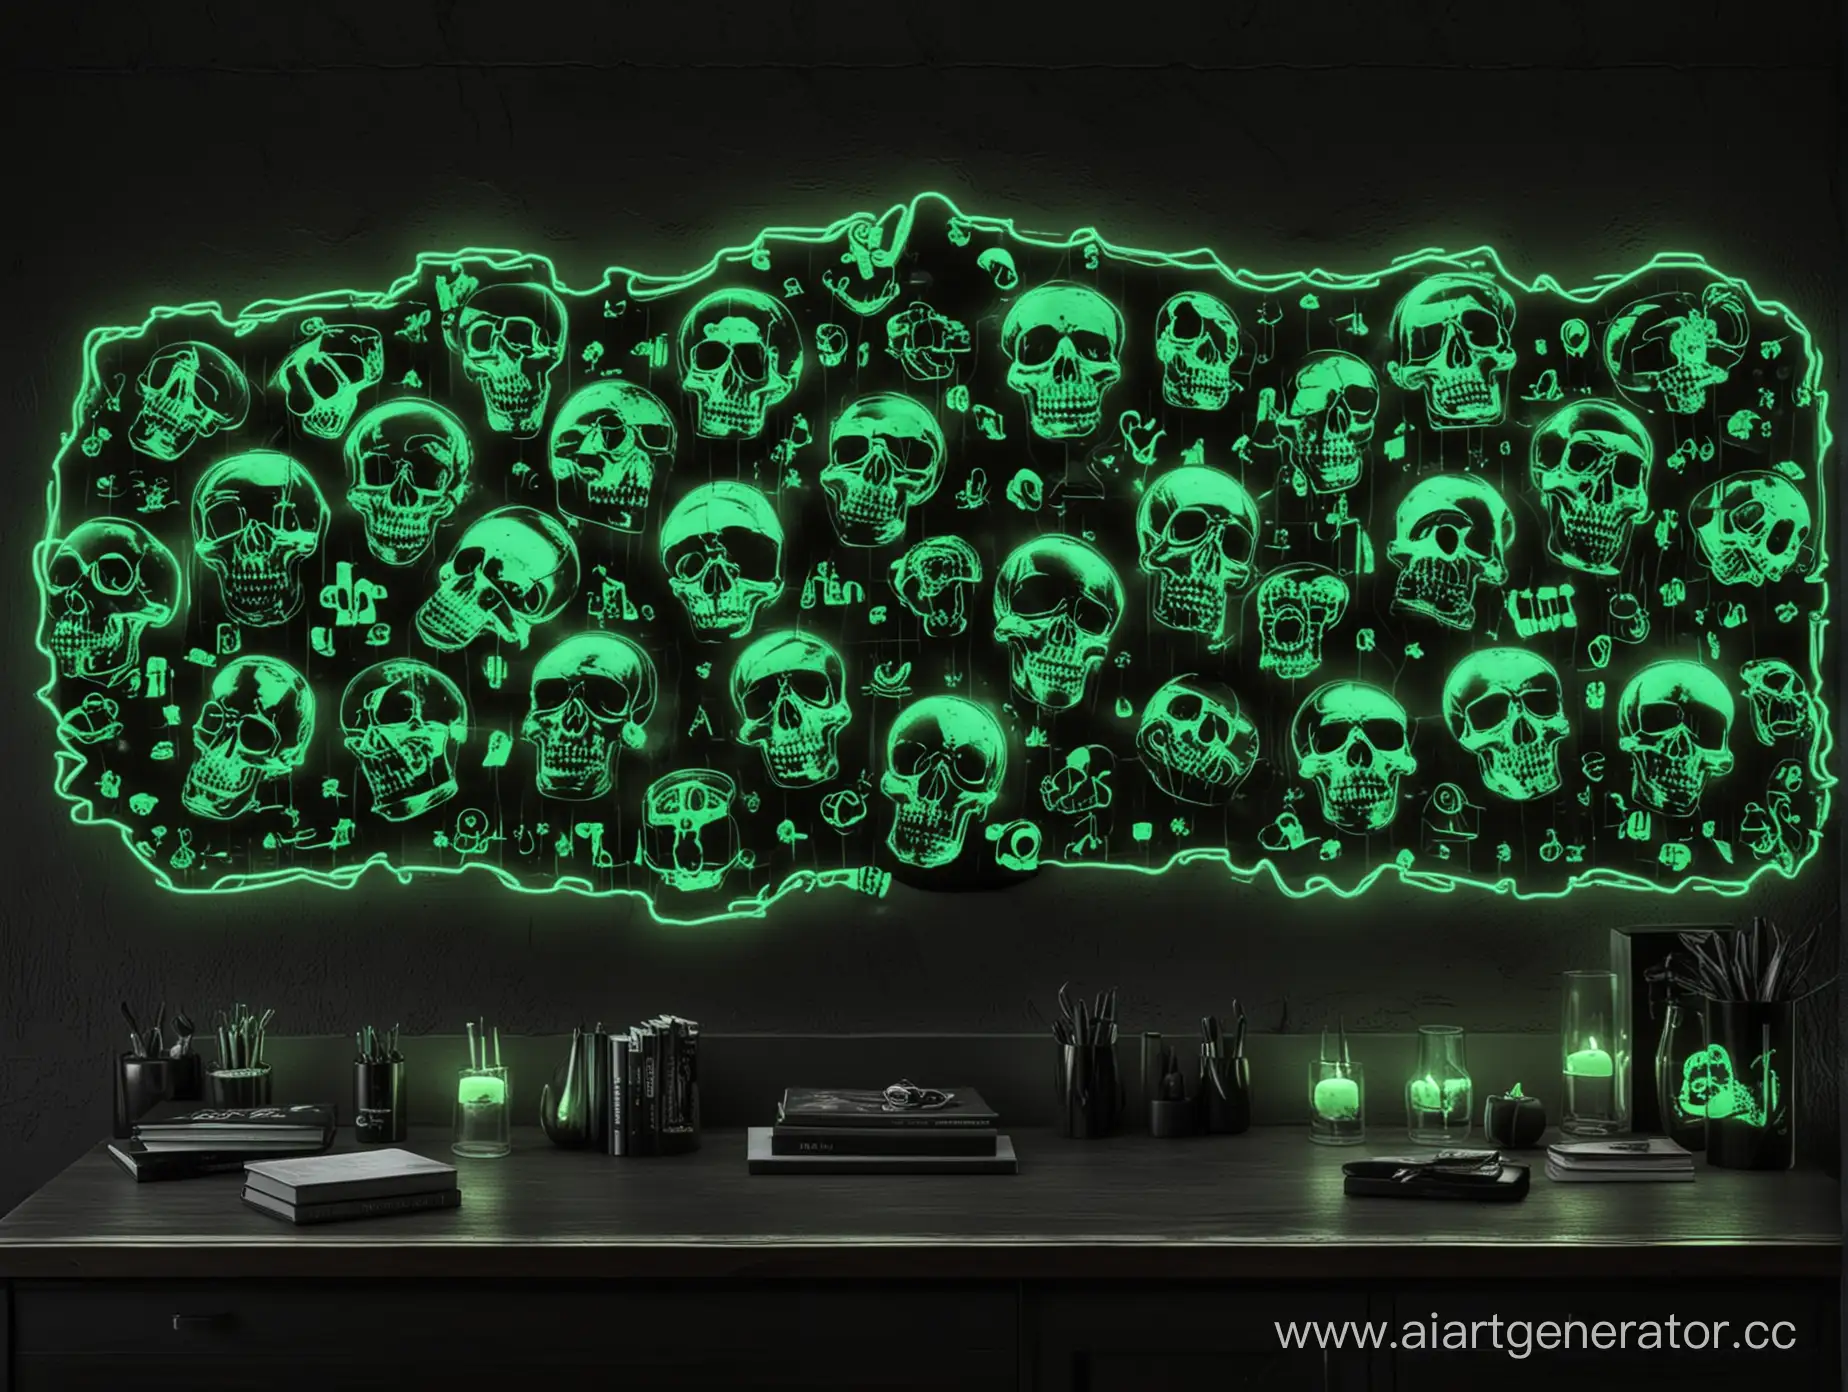 Gothic-Skull-Decoration-in-Black-and-NeonGreen-Style